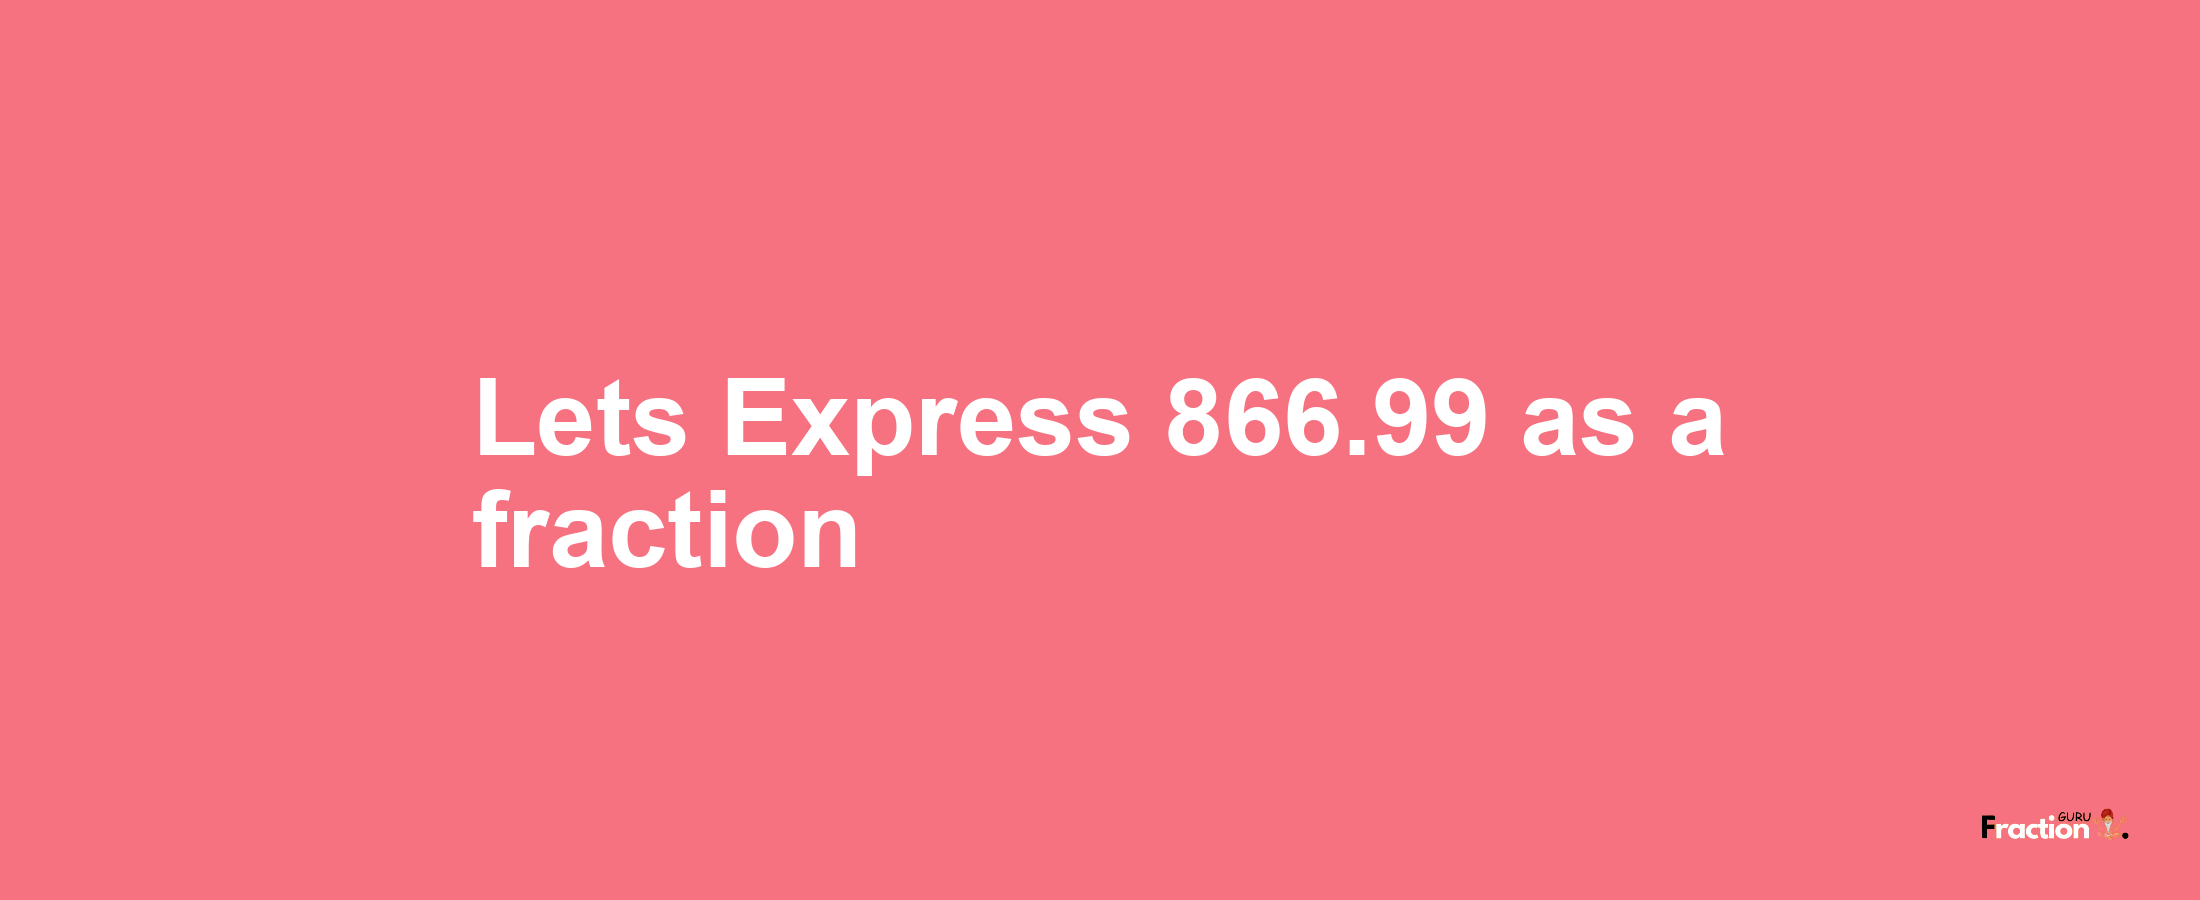 Lets Express 866.99 as afraction